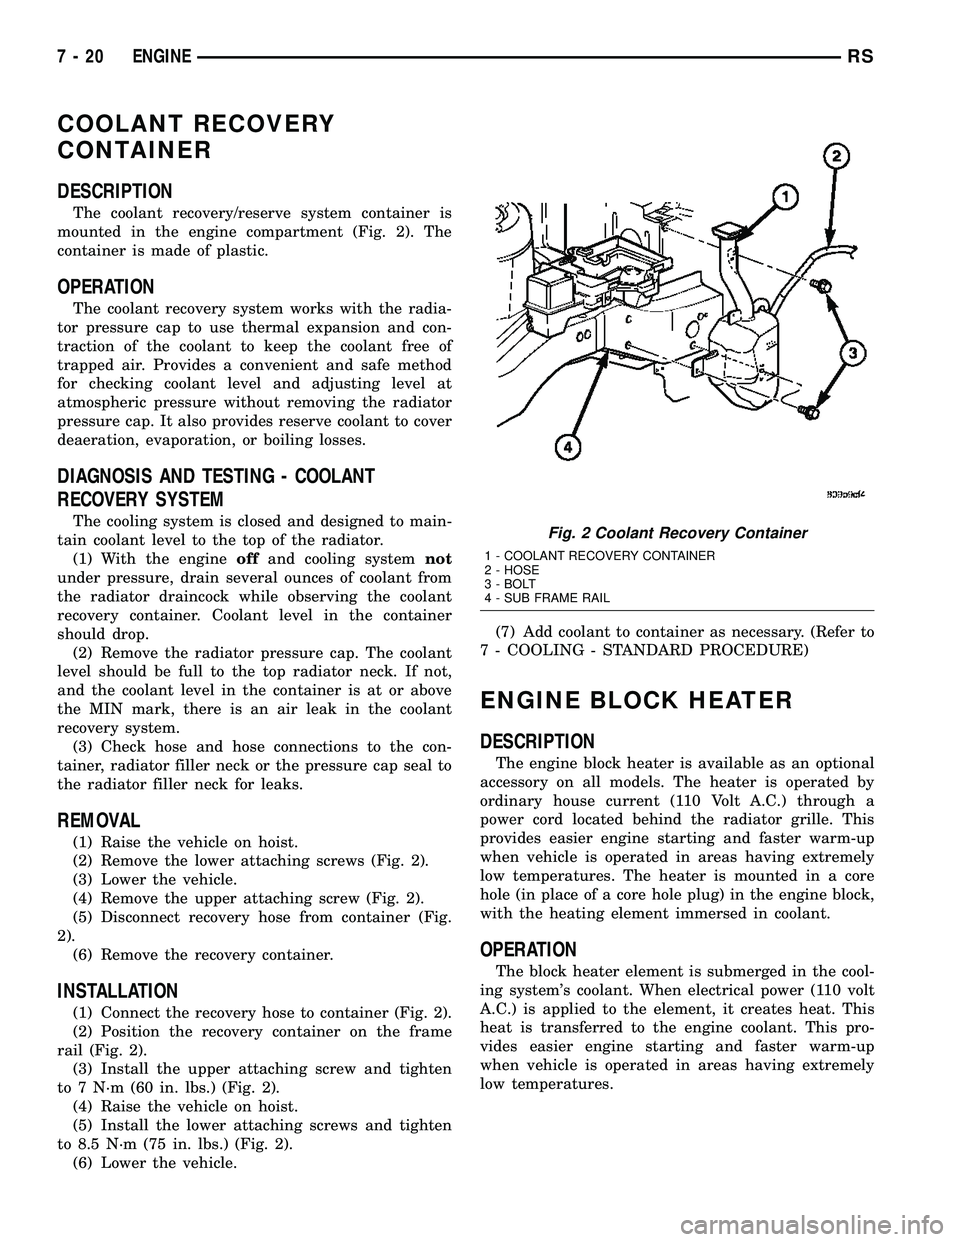 CHRYSLER VOYAGER 2005  Service Manual COOLANT RECOVERY
CONTAINER
DESCRIPTION
The coolant recovery/reserve system container is
mounted in the engine compartment (Fig. 2). The
container is made of plastic.
OPERATION
The coolant recovery sys